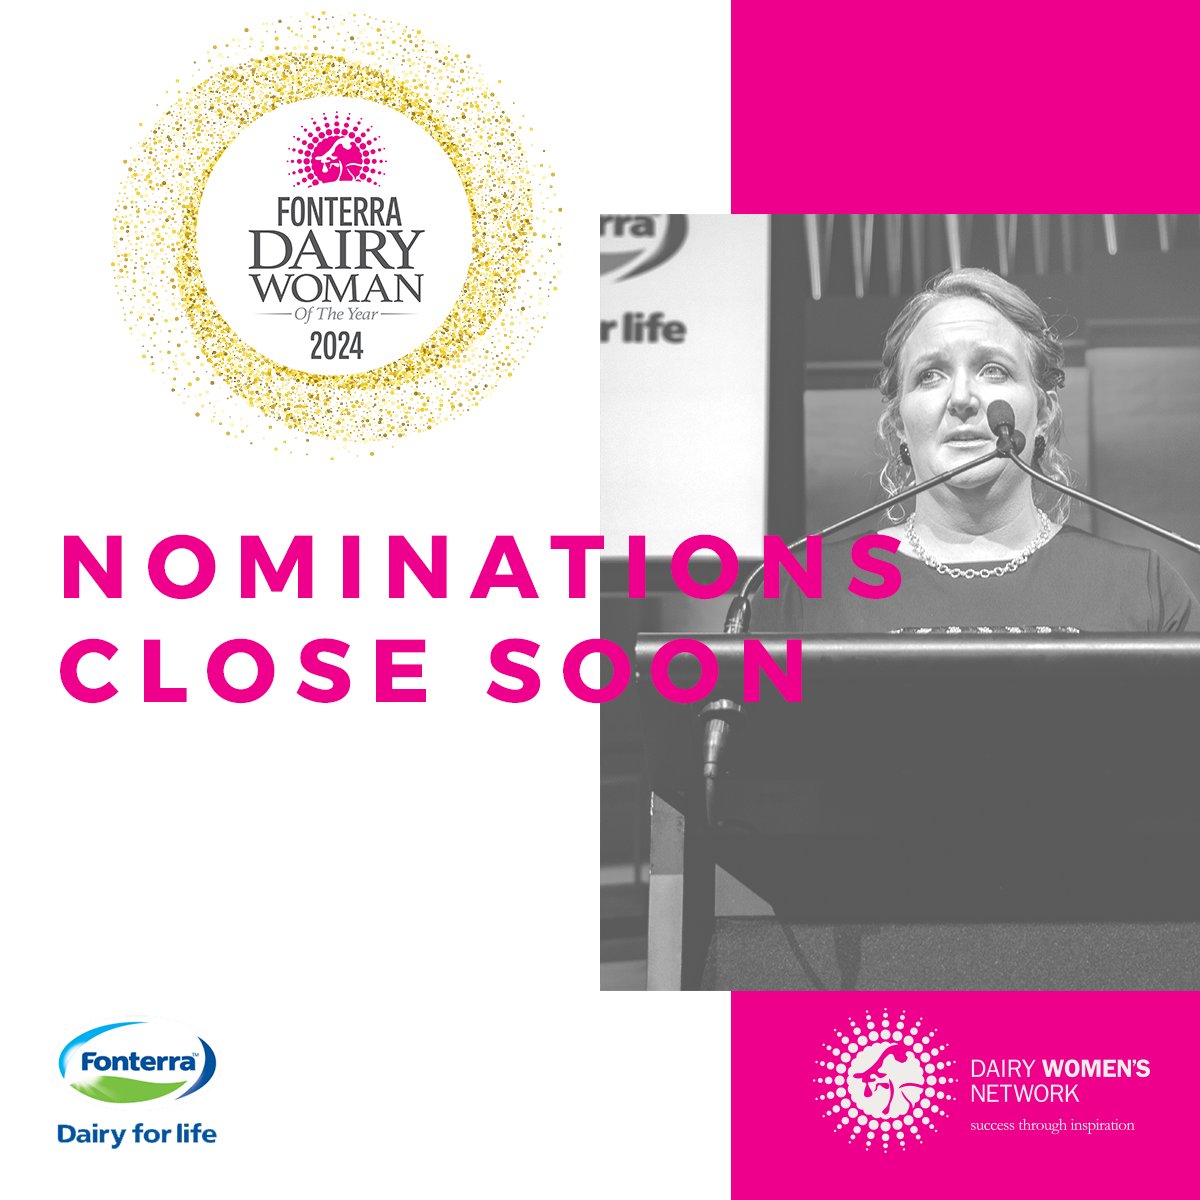 You only have ONE WEEK left to get your nominations in. Nominate / Apply at: dwn.co.nz/fonterra-dairy… Remember that if you know more than one deserving woman, you can nominate them both!